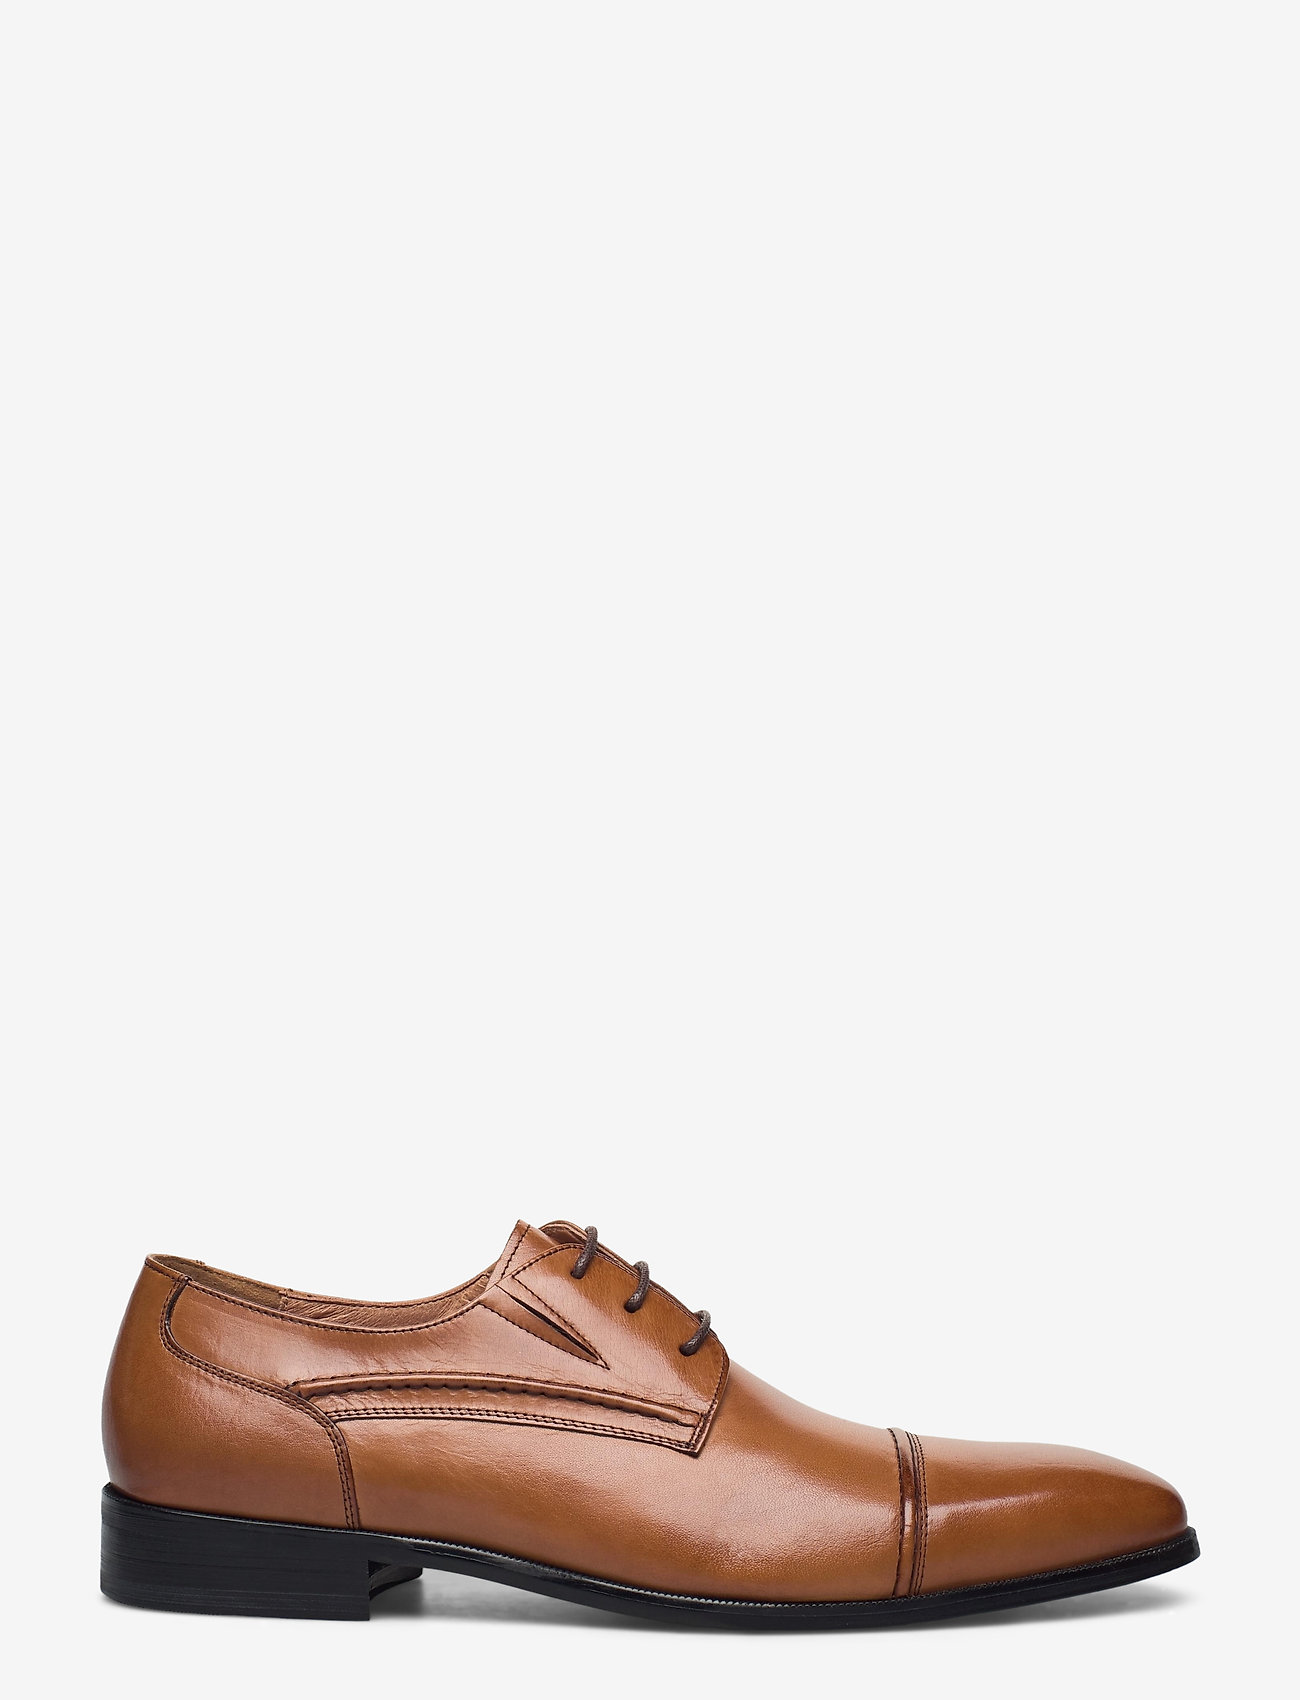 TGA by Ahler Laced Derby Shoe With Toecap - Laced shoes | Boozt.com